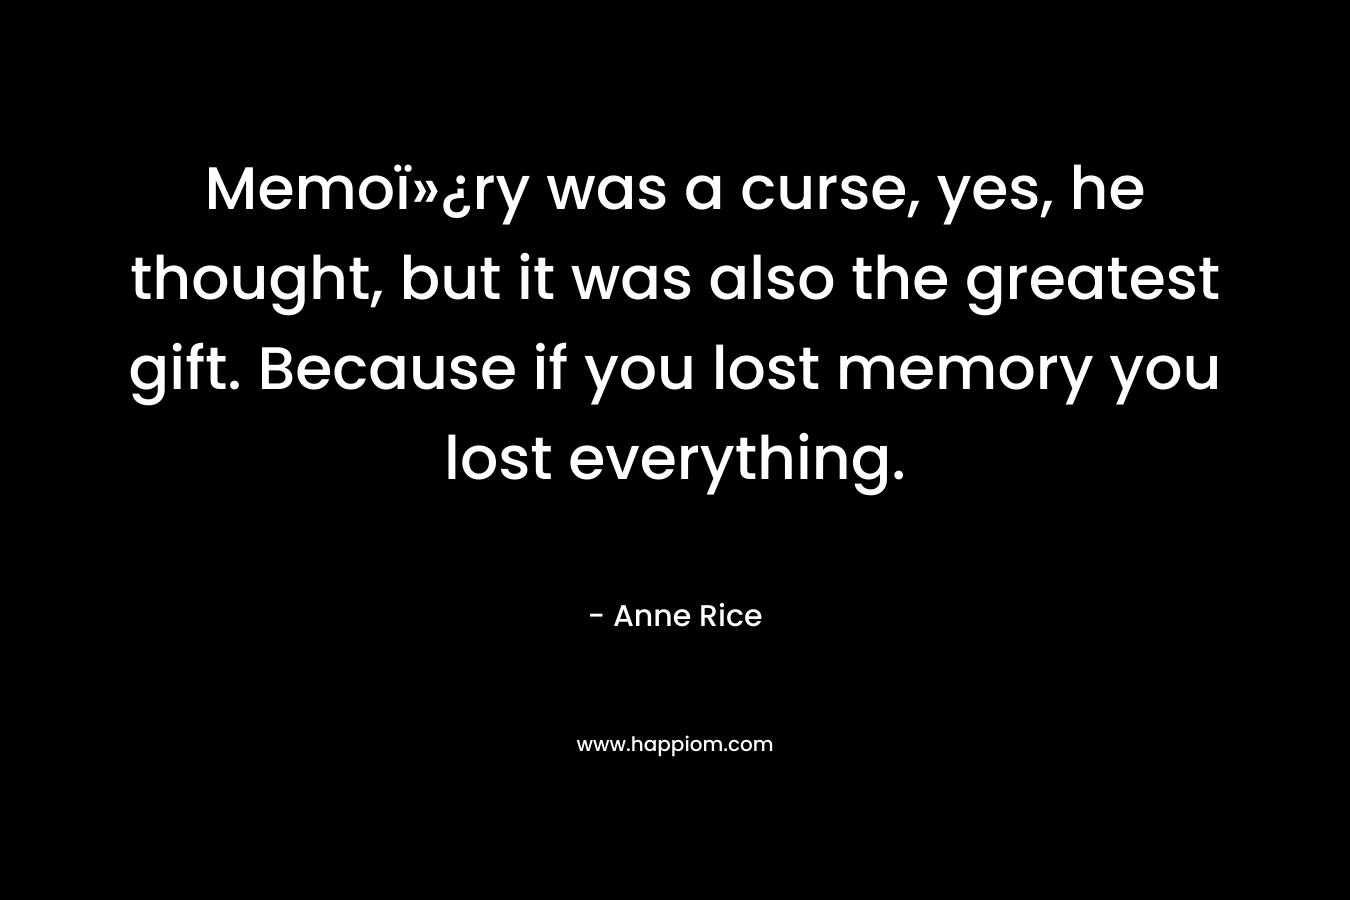 Memoï»¿ry was a curse, yes, he thought, but it was also the greatest gift. Because if you lost memory you lost everything.